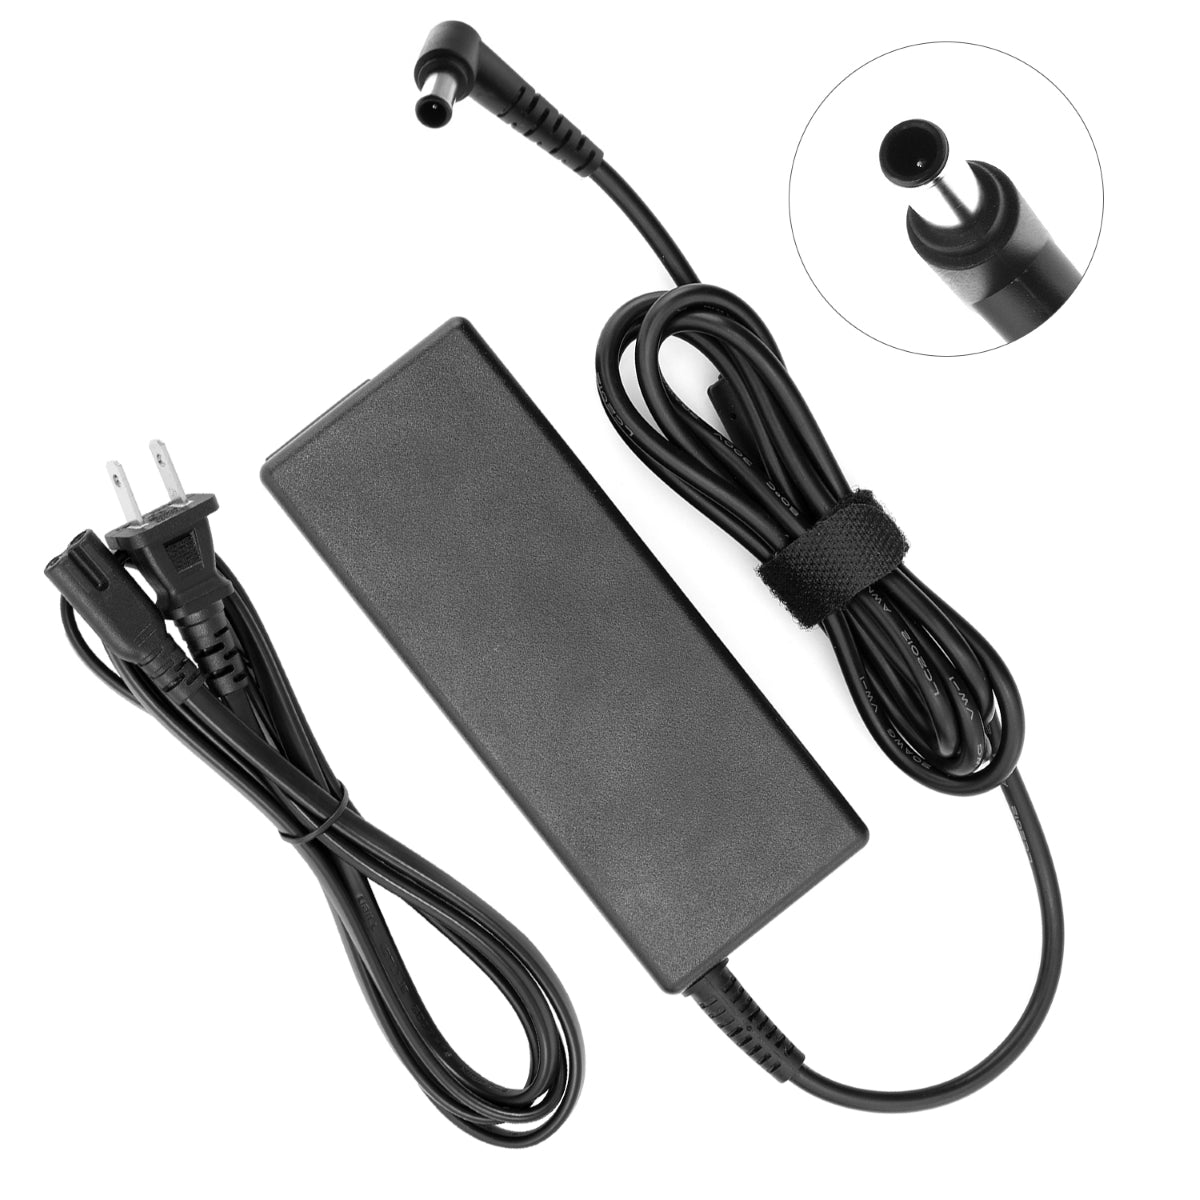 Compatible Charger for Sony Vaio PCG-71213L